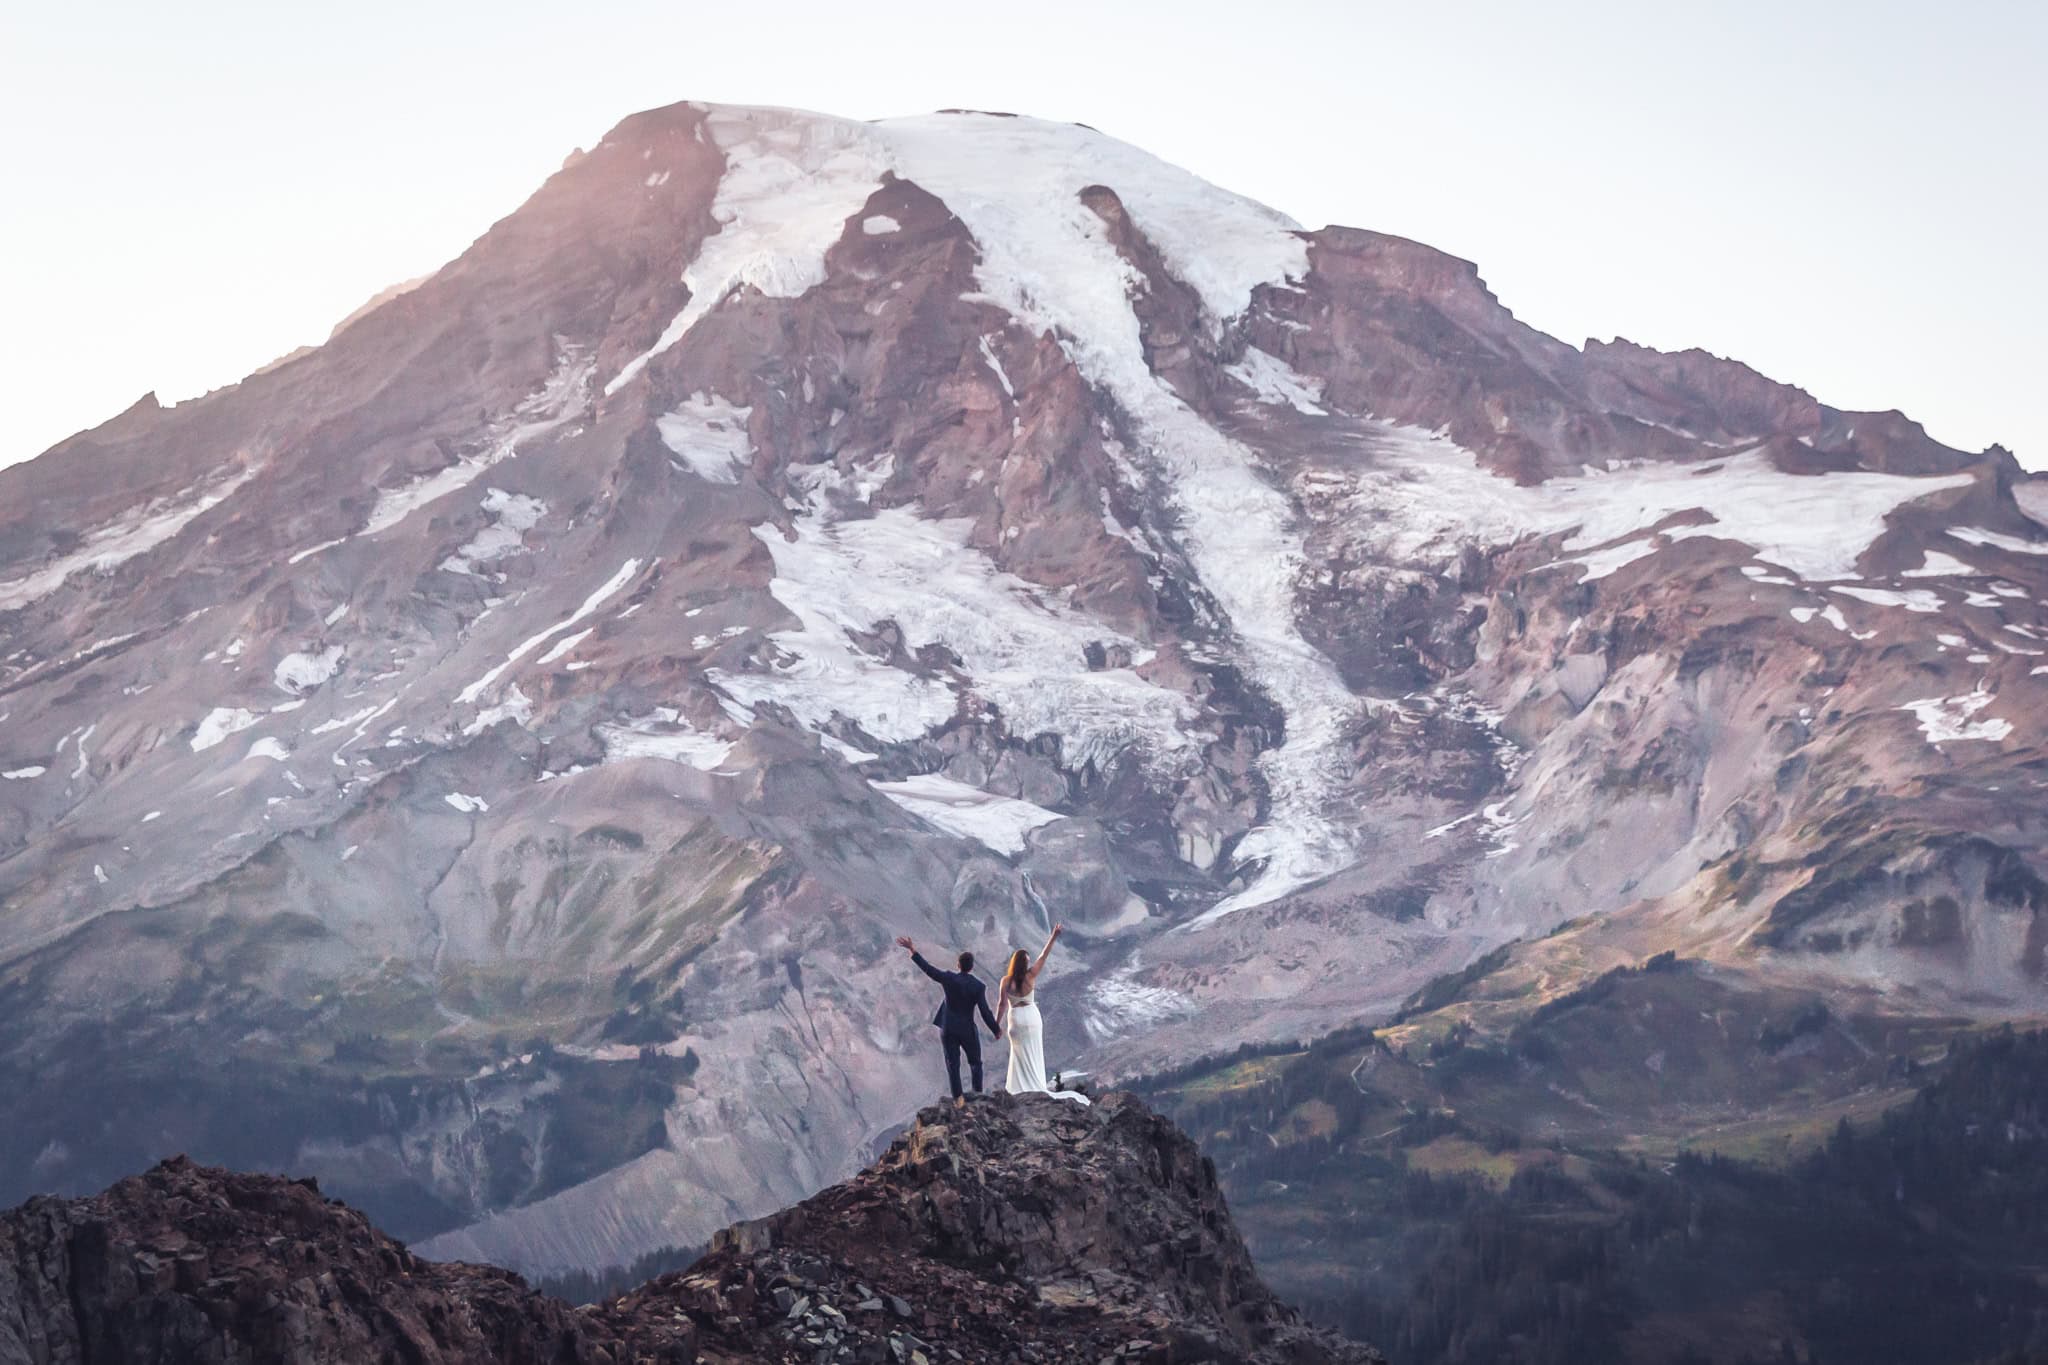 Mt. Rainier elopement combines the thrill of adventure with the romance of an intimate ceremony